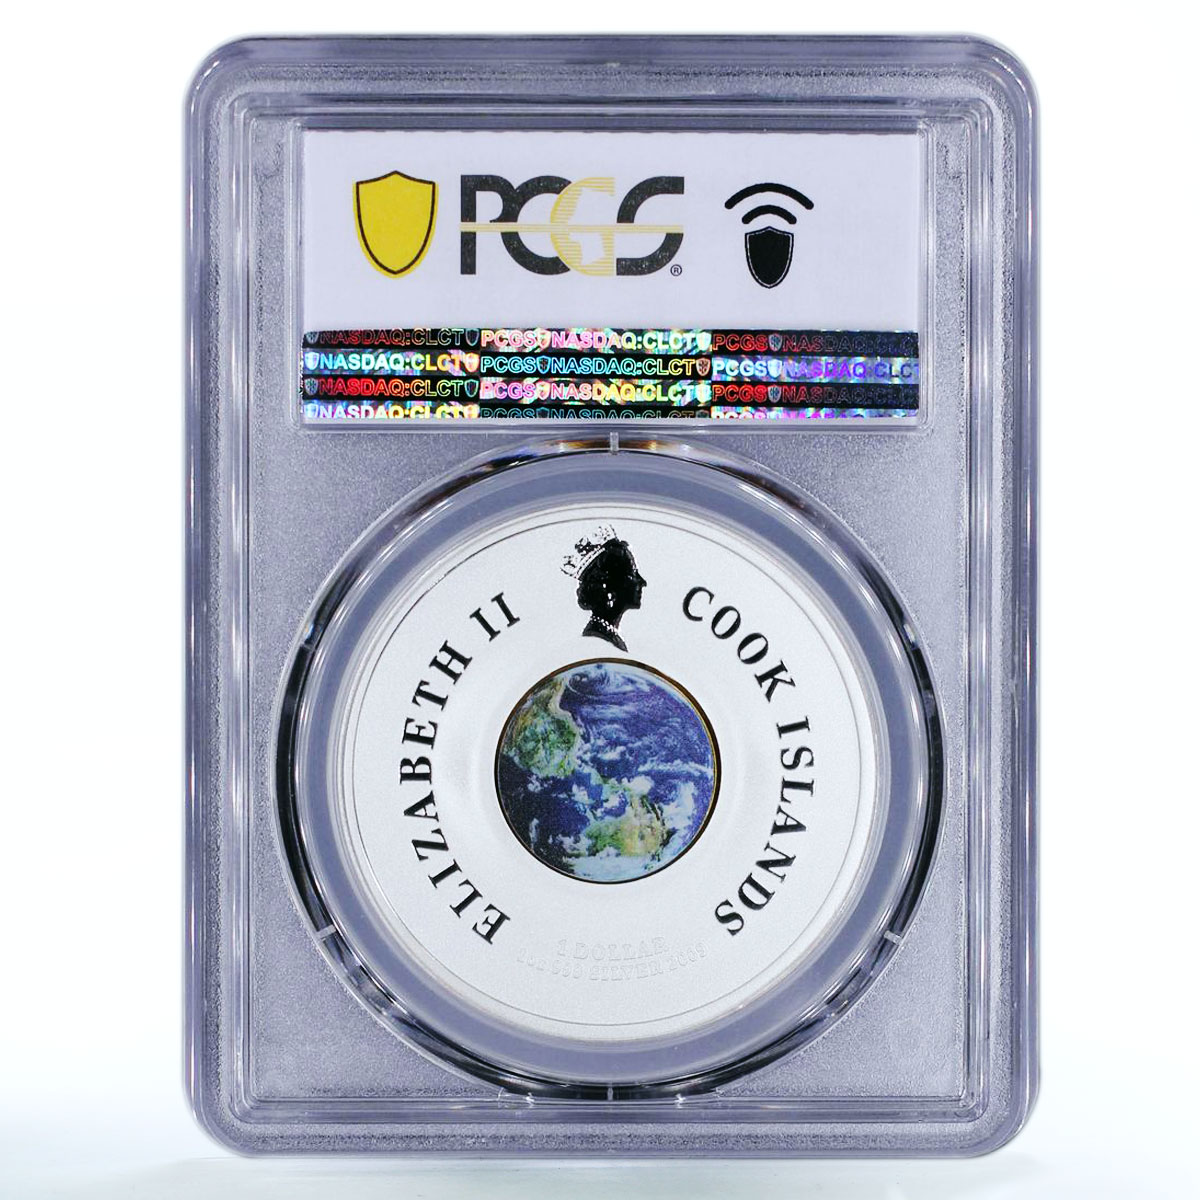 Cook Island 1 dollar First Space Walk Rocket PR70 PCGS color silver coin 2009